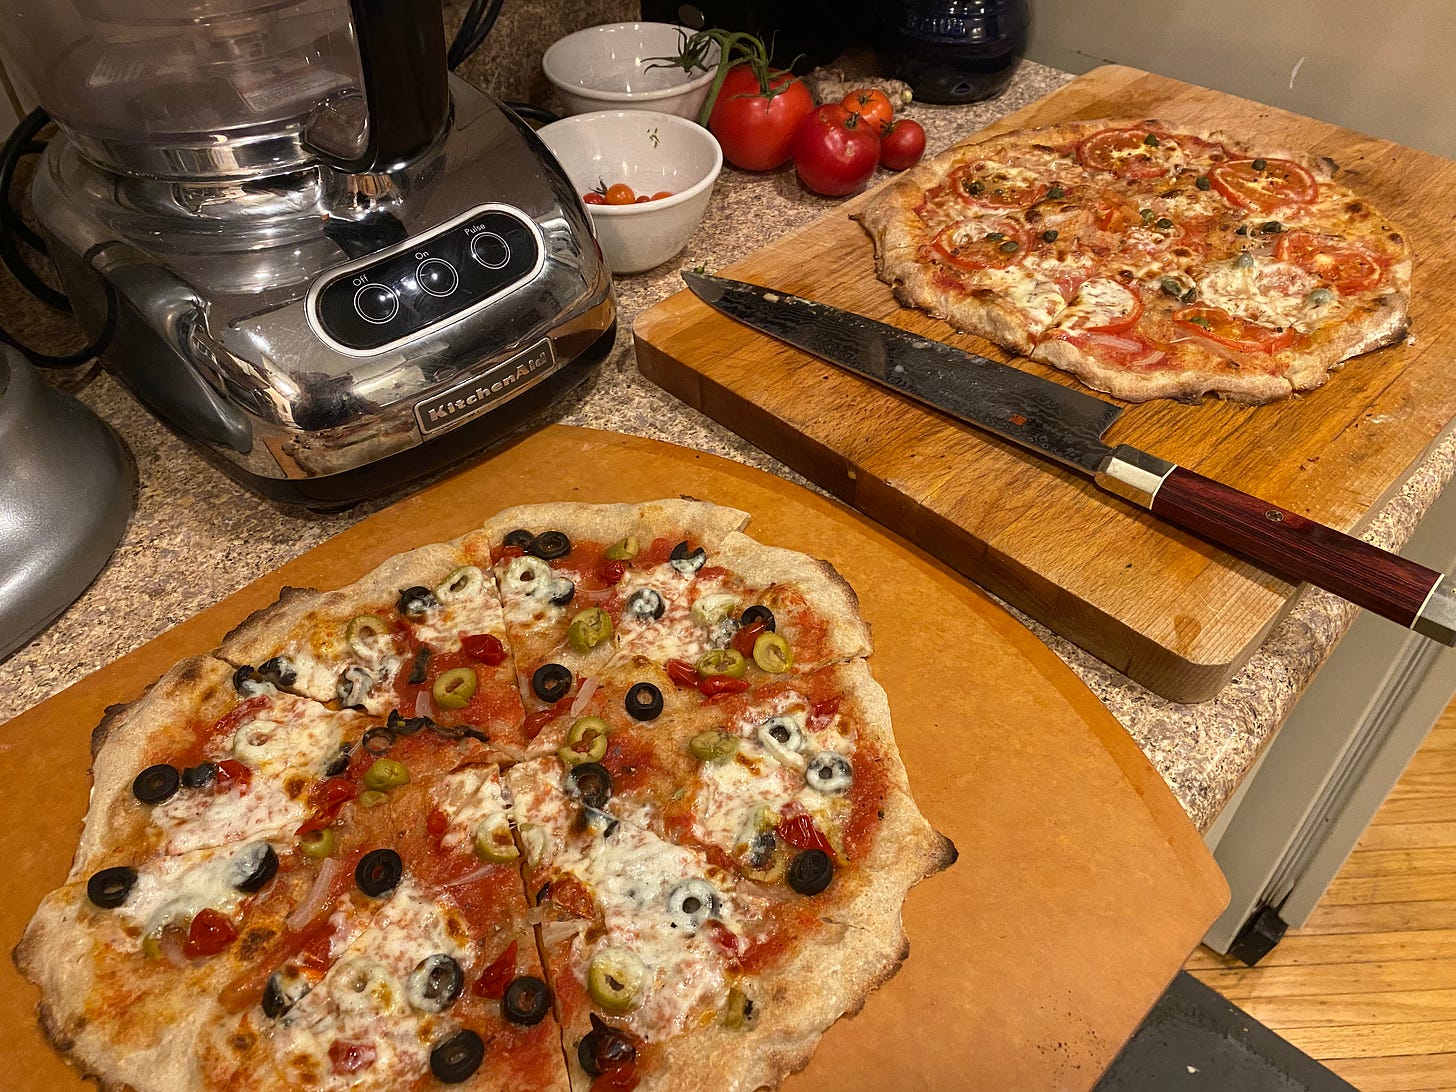 Two pizzas on boards with a knife in between them. In the foreground is the one with olives and peppers, and in the background is the one with tomatoes and capers, as described above. At the left of the frame are glimpses of a food processor and some fresh tomatoes on the vine.